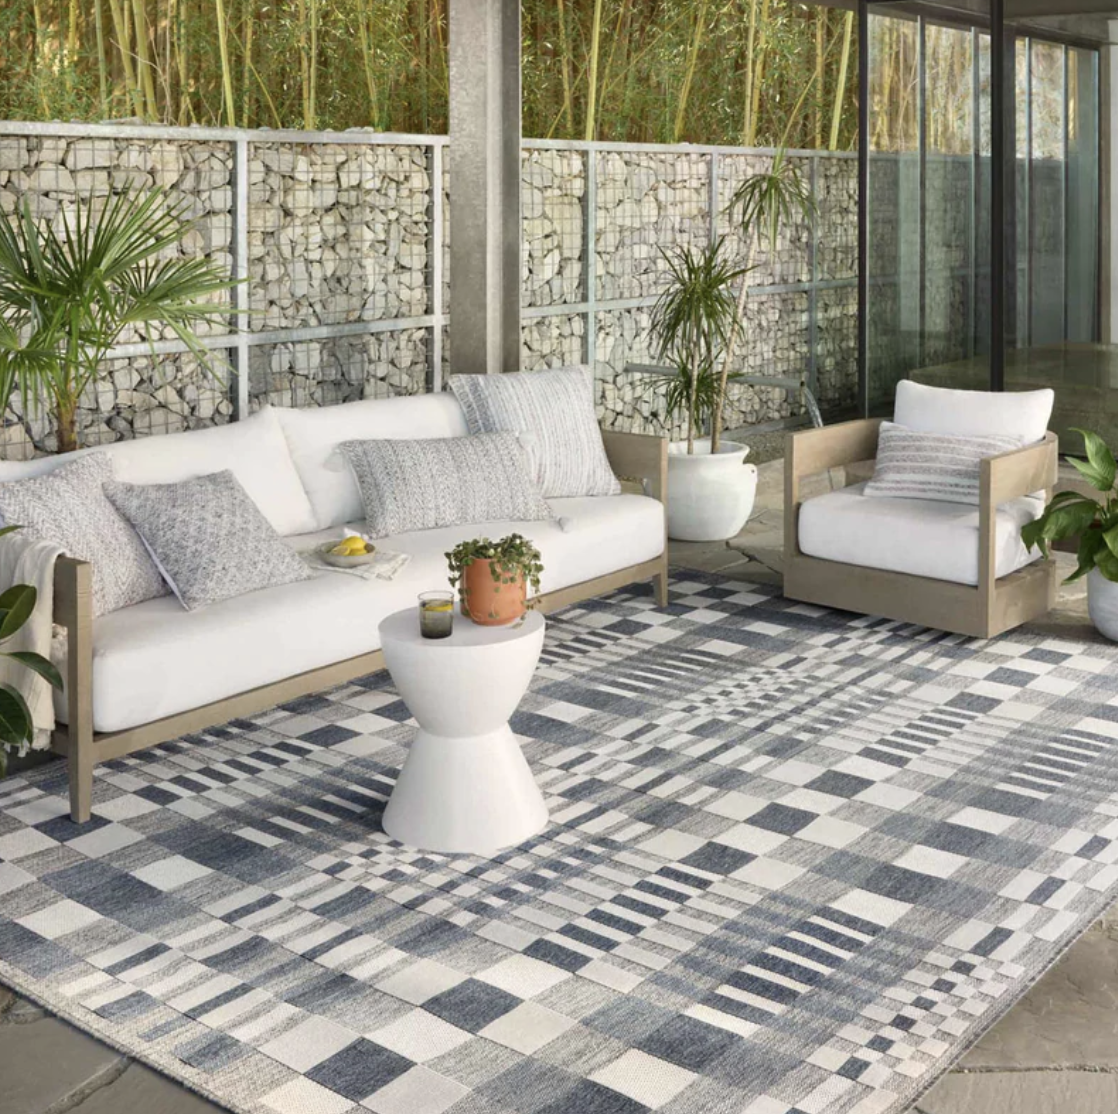 denim-print checkered gray and white rectangle rug under outdoor sofa and chair with white cushions